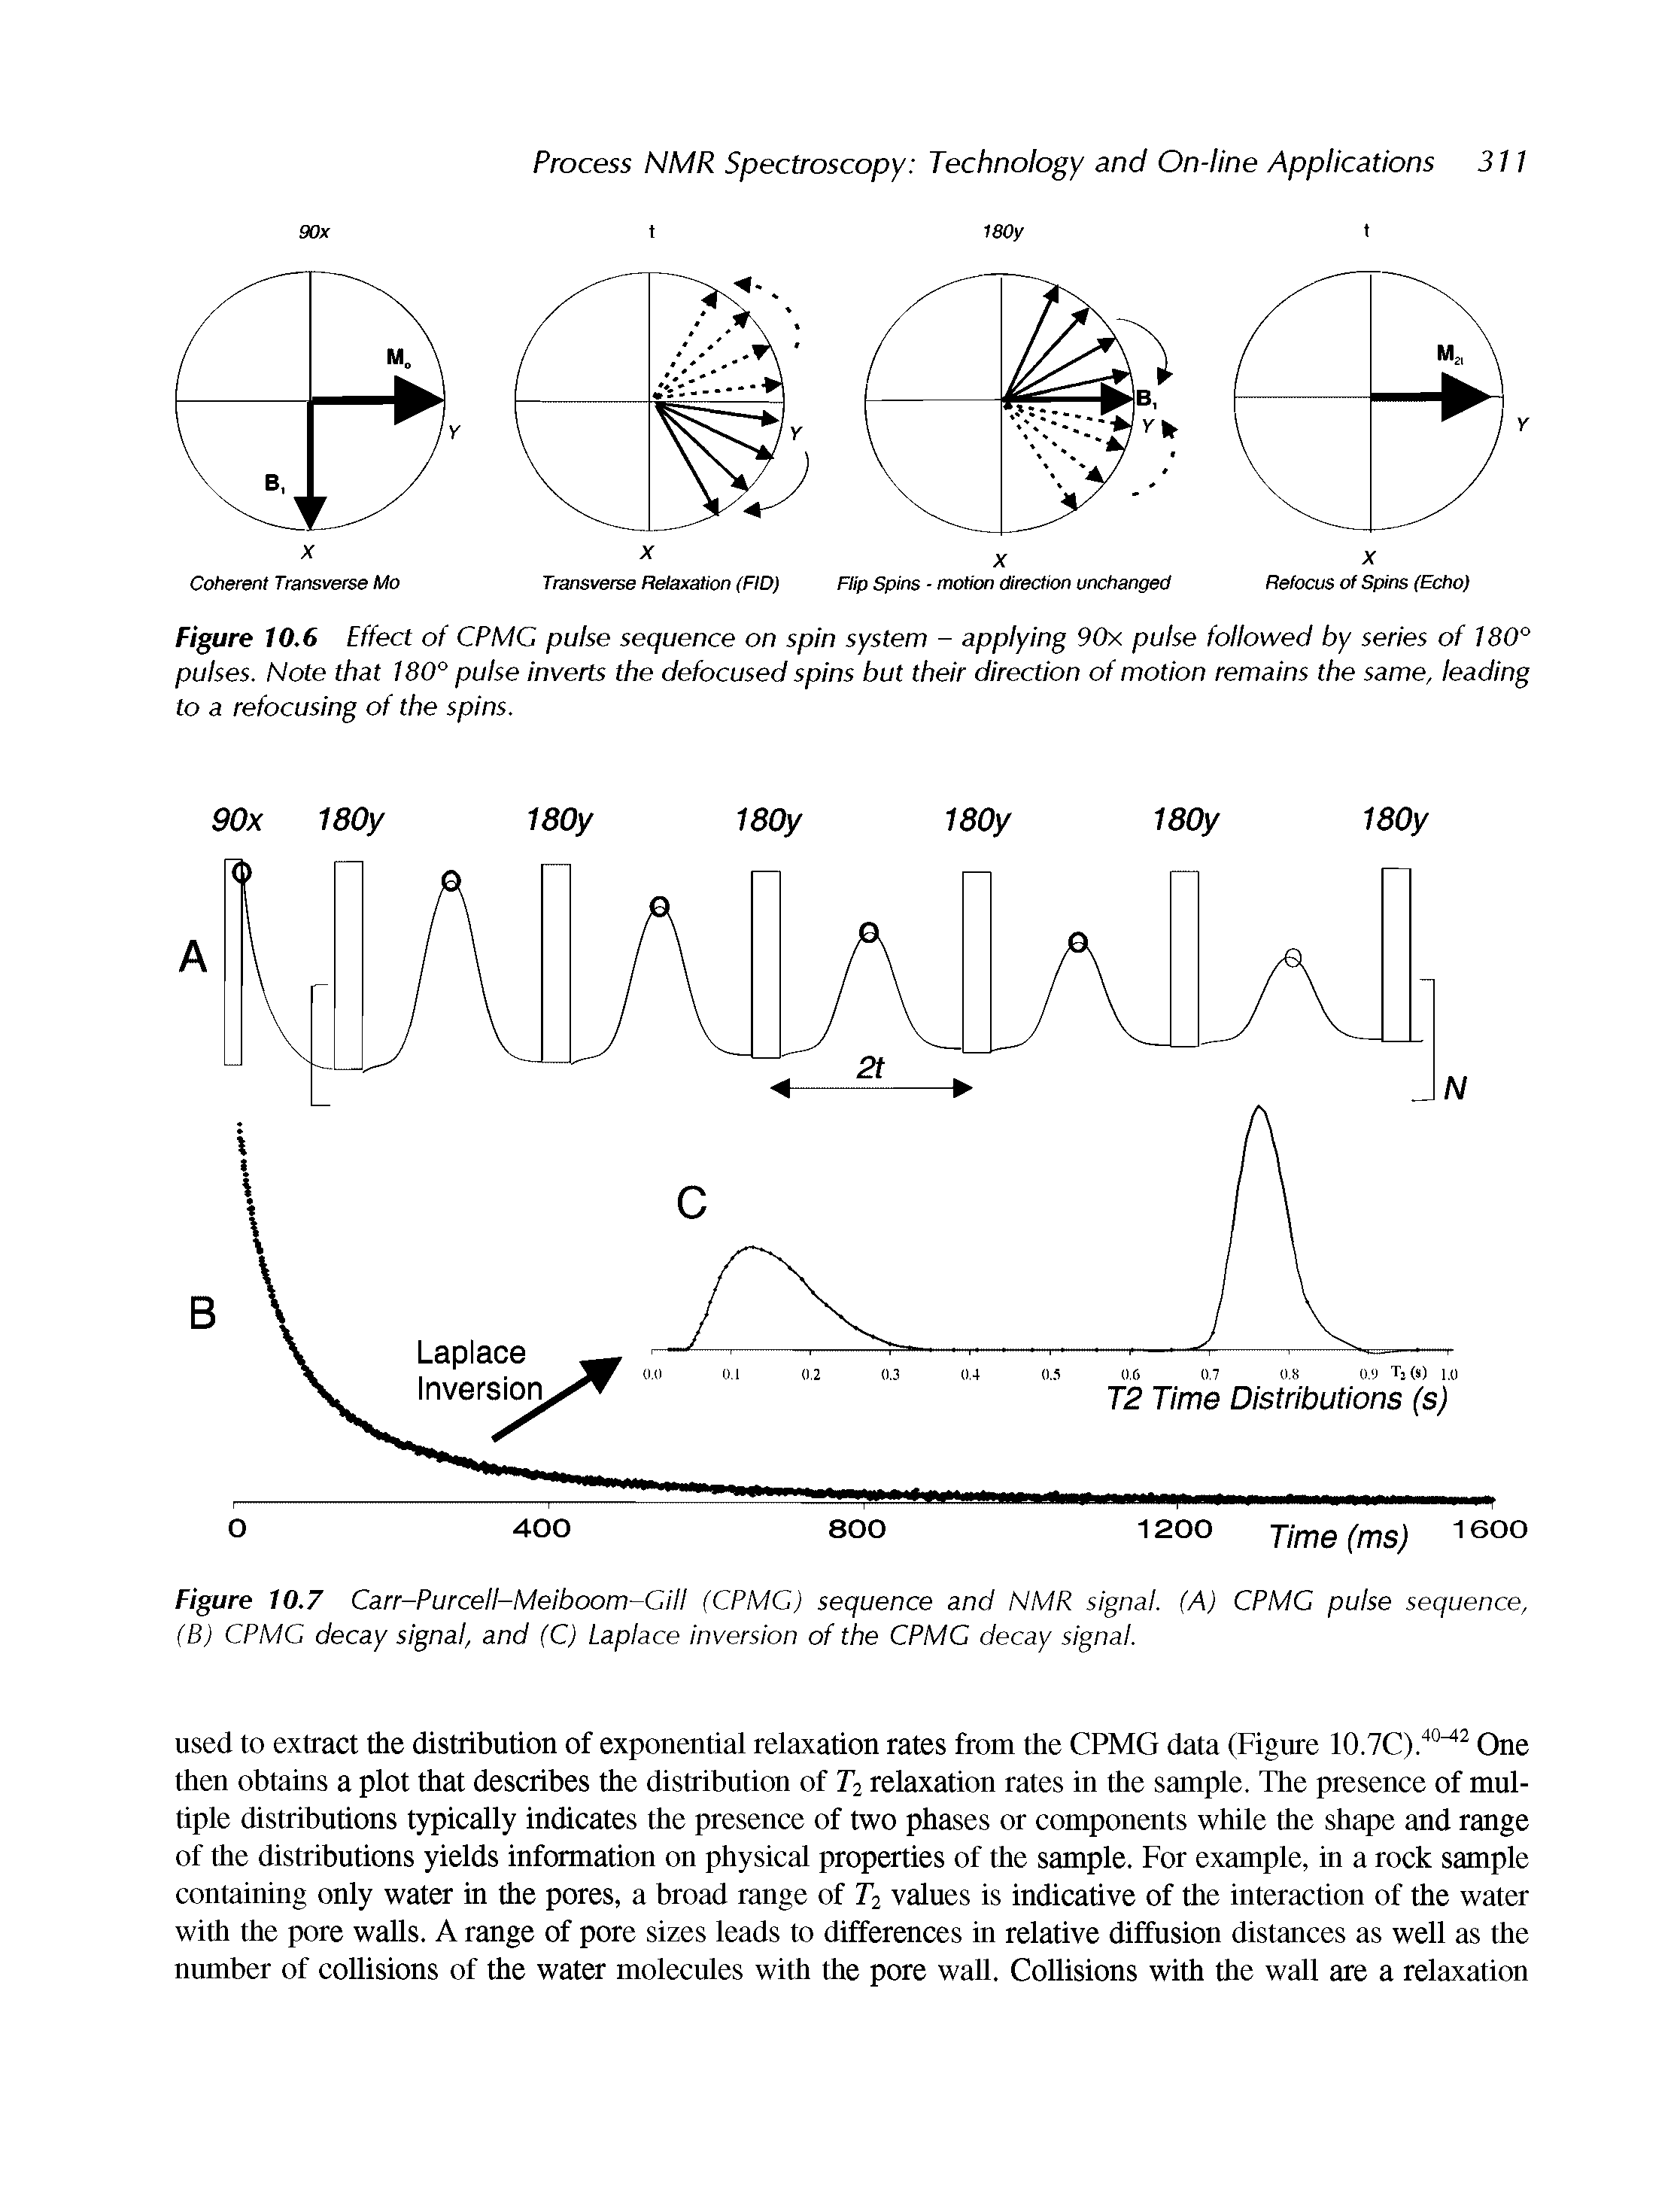 Figure 10.7 Carr-Purcell-Meiboom Gill (CPMC) sequence and NMR signal. (A) CPMC pulse sequence, (B) CPMC decay signal, and (C) Laplace inversion of the CPMC decay signal.